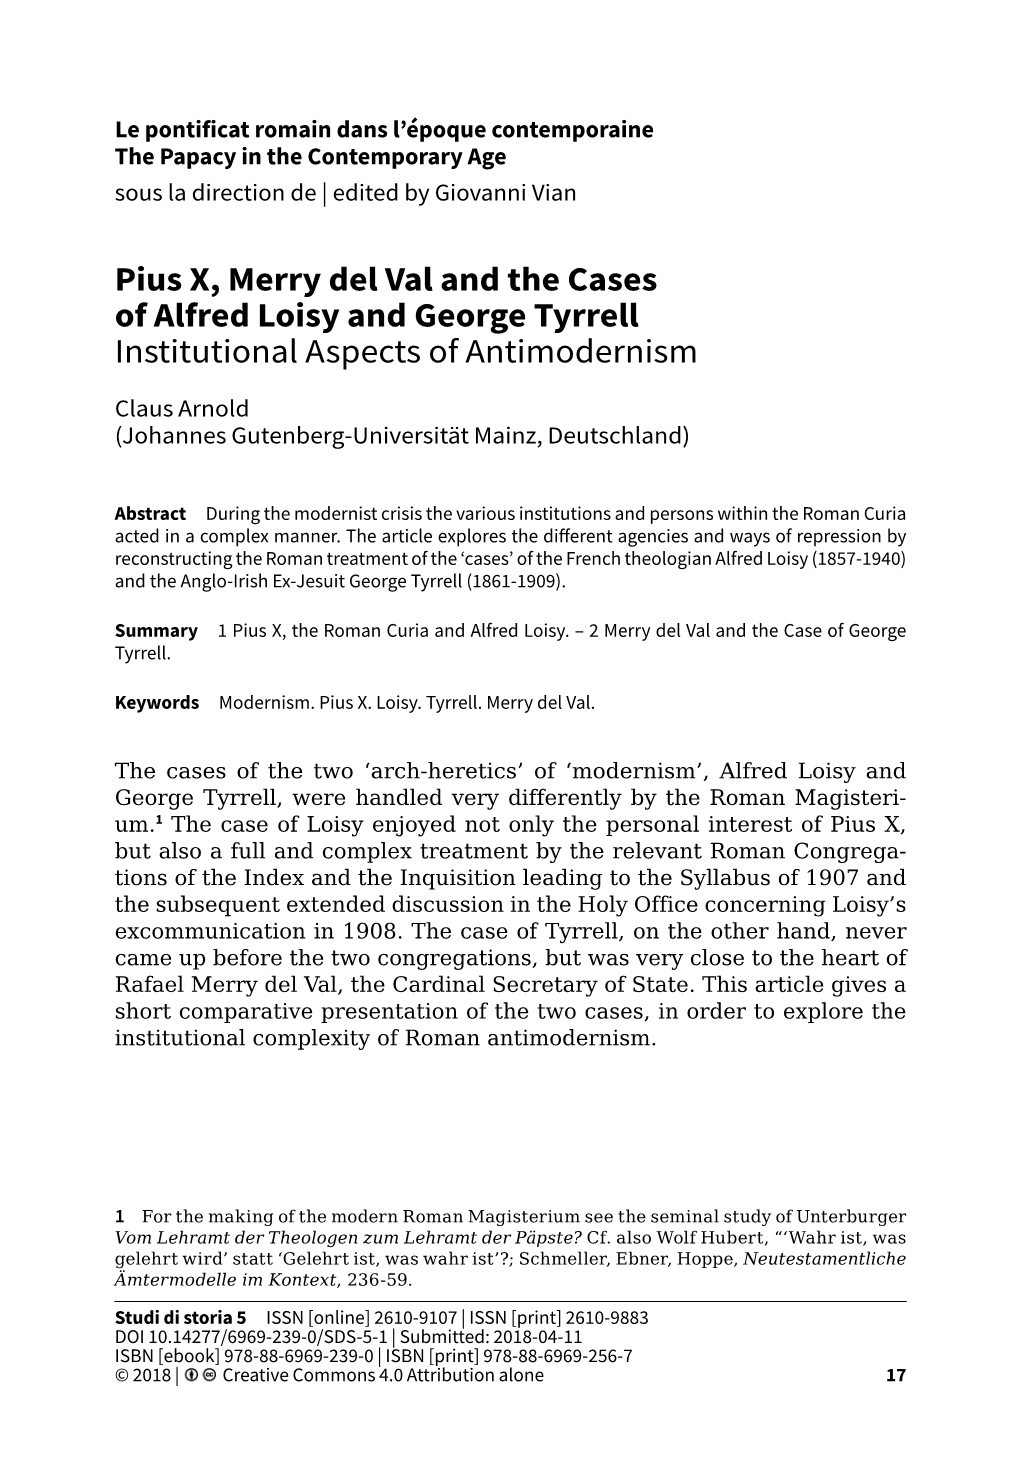 Pius X, Merry Del Val and the Cases of Alfred Loisy and George Tyrrell Institutional Aspects of Antimodernism